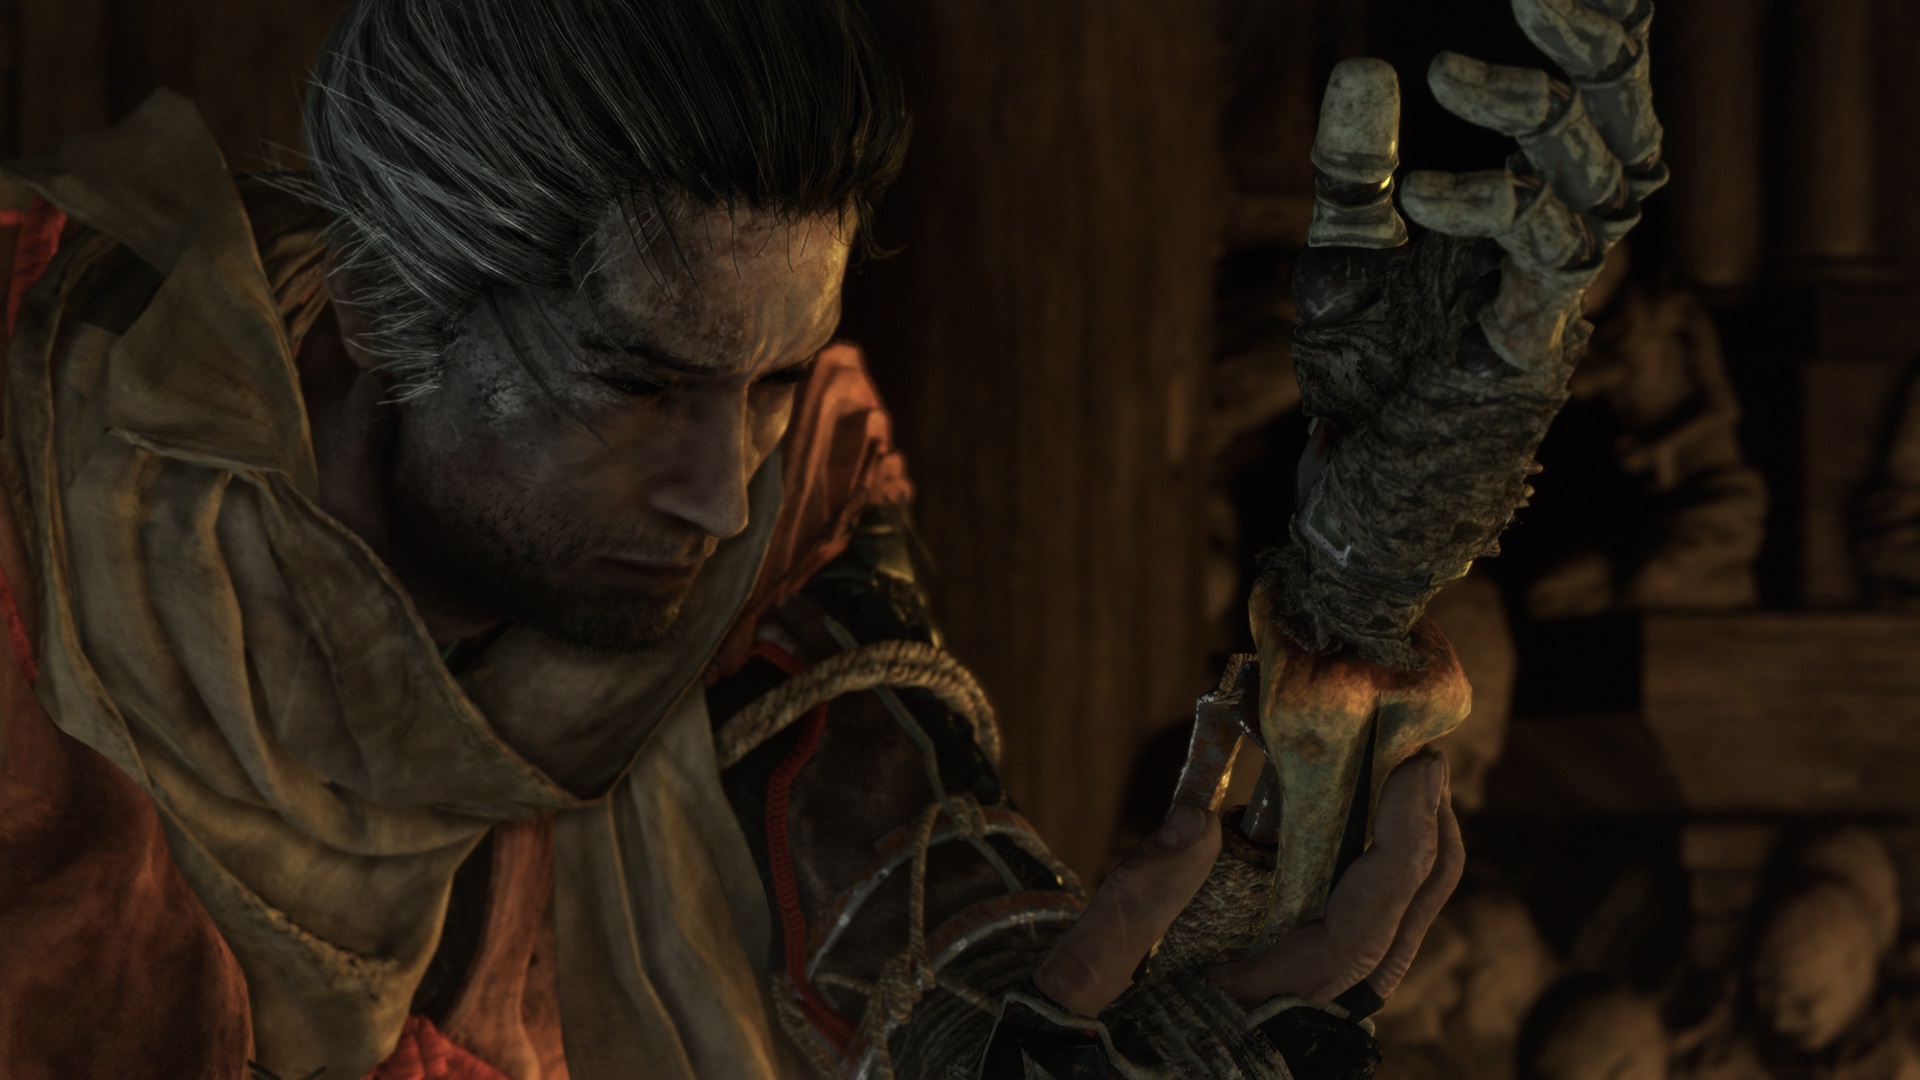 Sekiro Shadows Die Twices Newest Trailer Teases An Intriguing Story